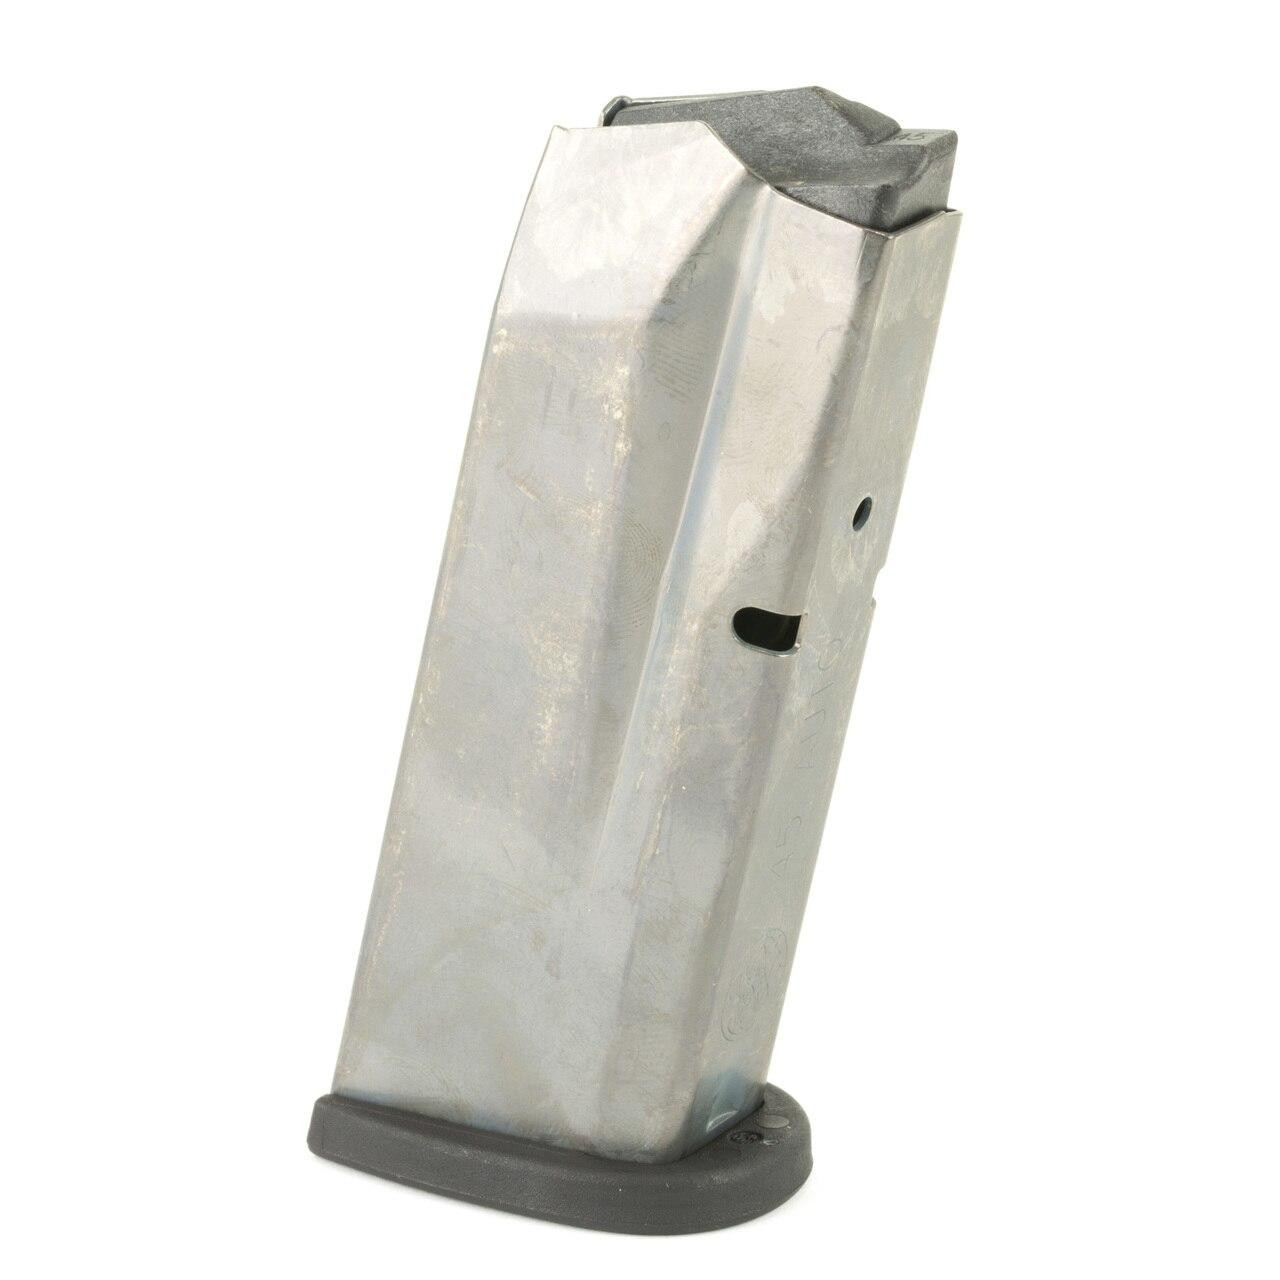 Smith and Wesson Mag Sandw Mandp Cmpct 45acp 8rd Blk 022188141443